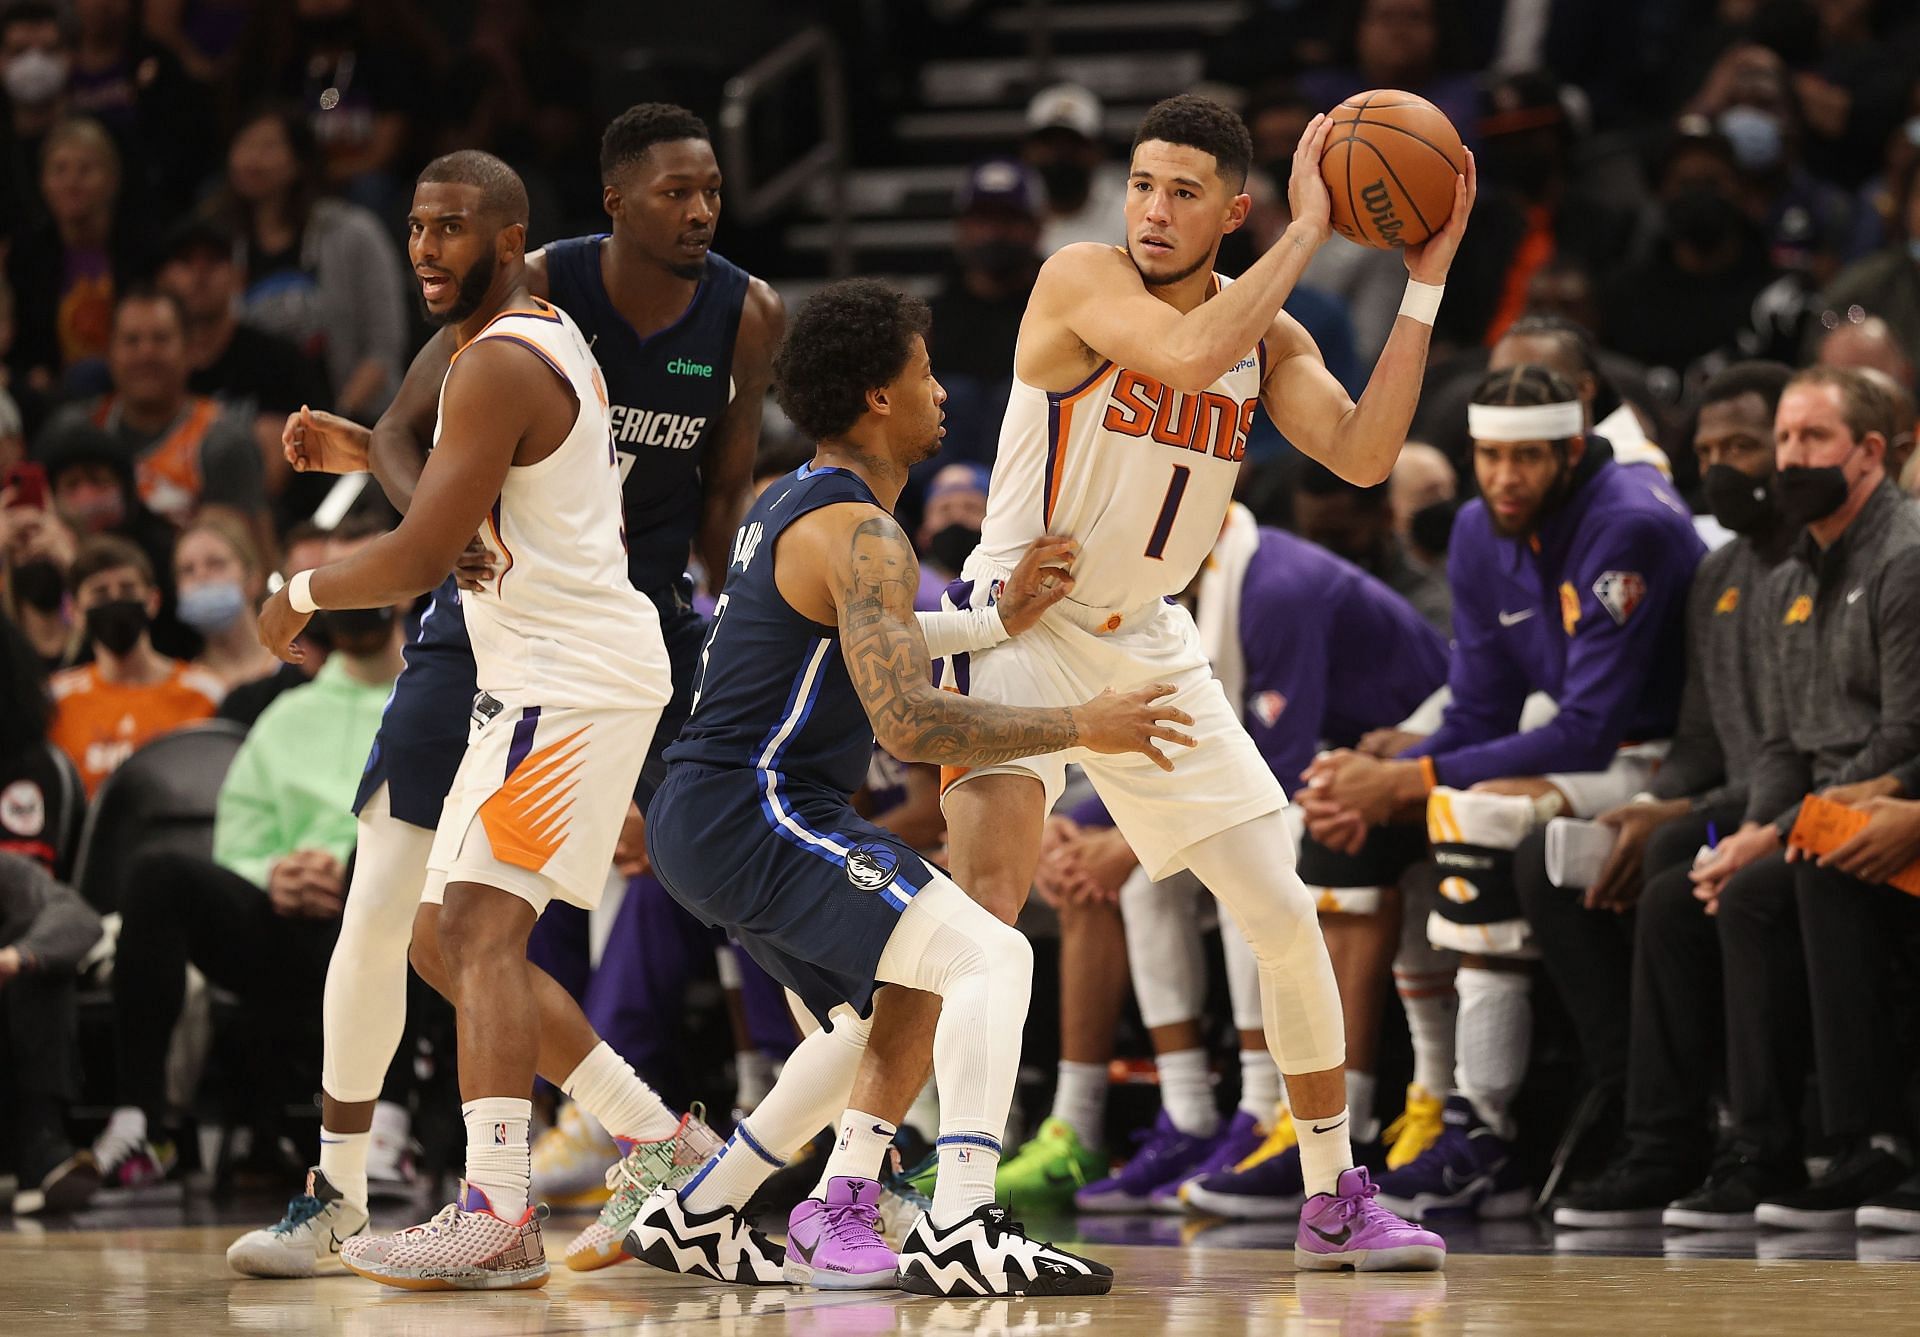 Chris Paul and Devin Booker have been leading the charge for the Phoenix Suns.